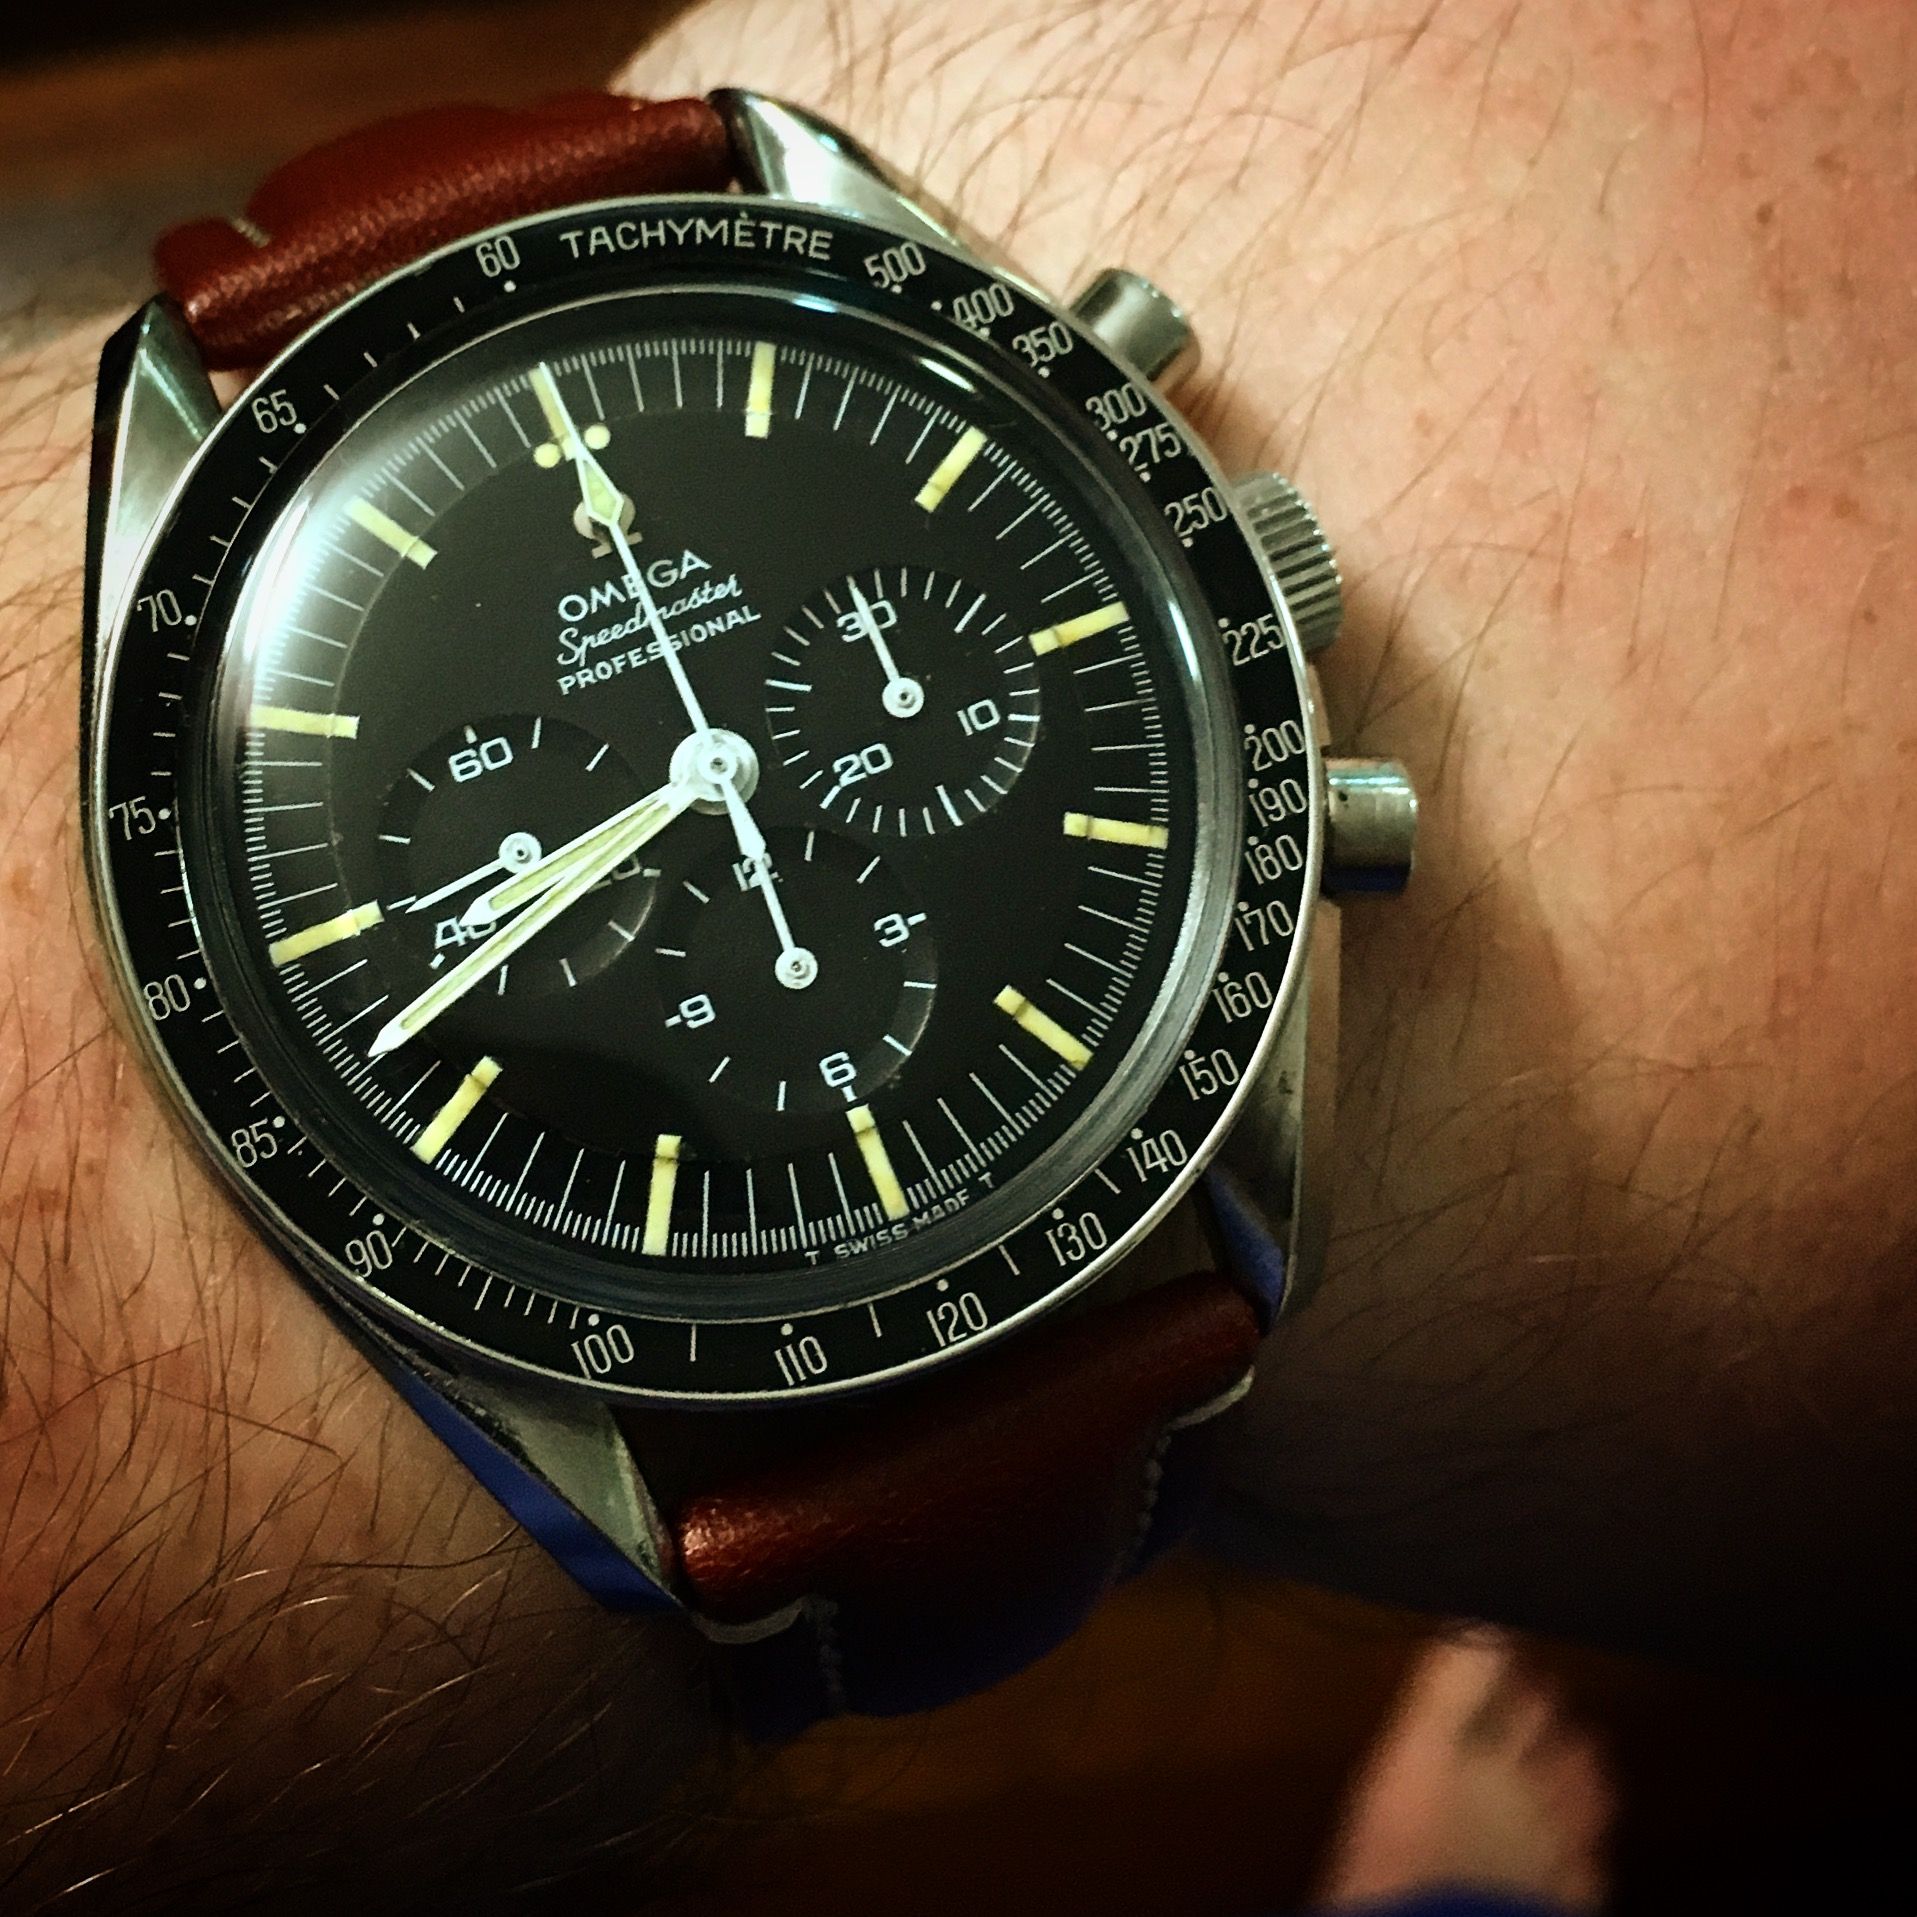 Why I Wrote 100 Articles Before Covering The Speedmaster